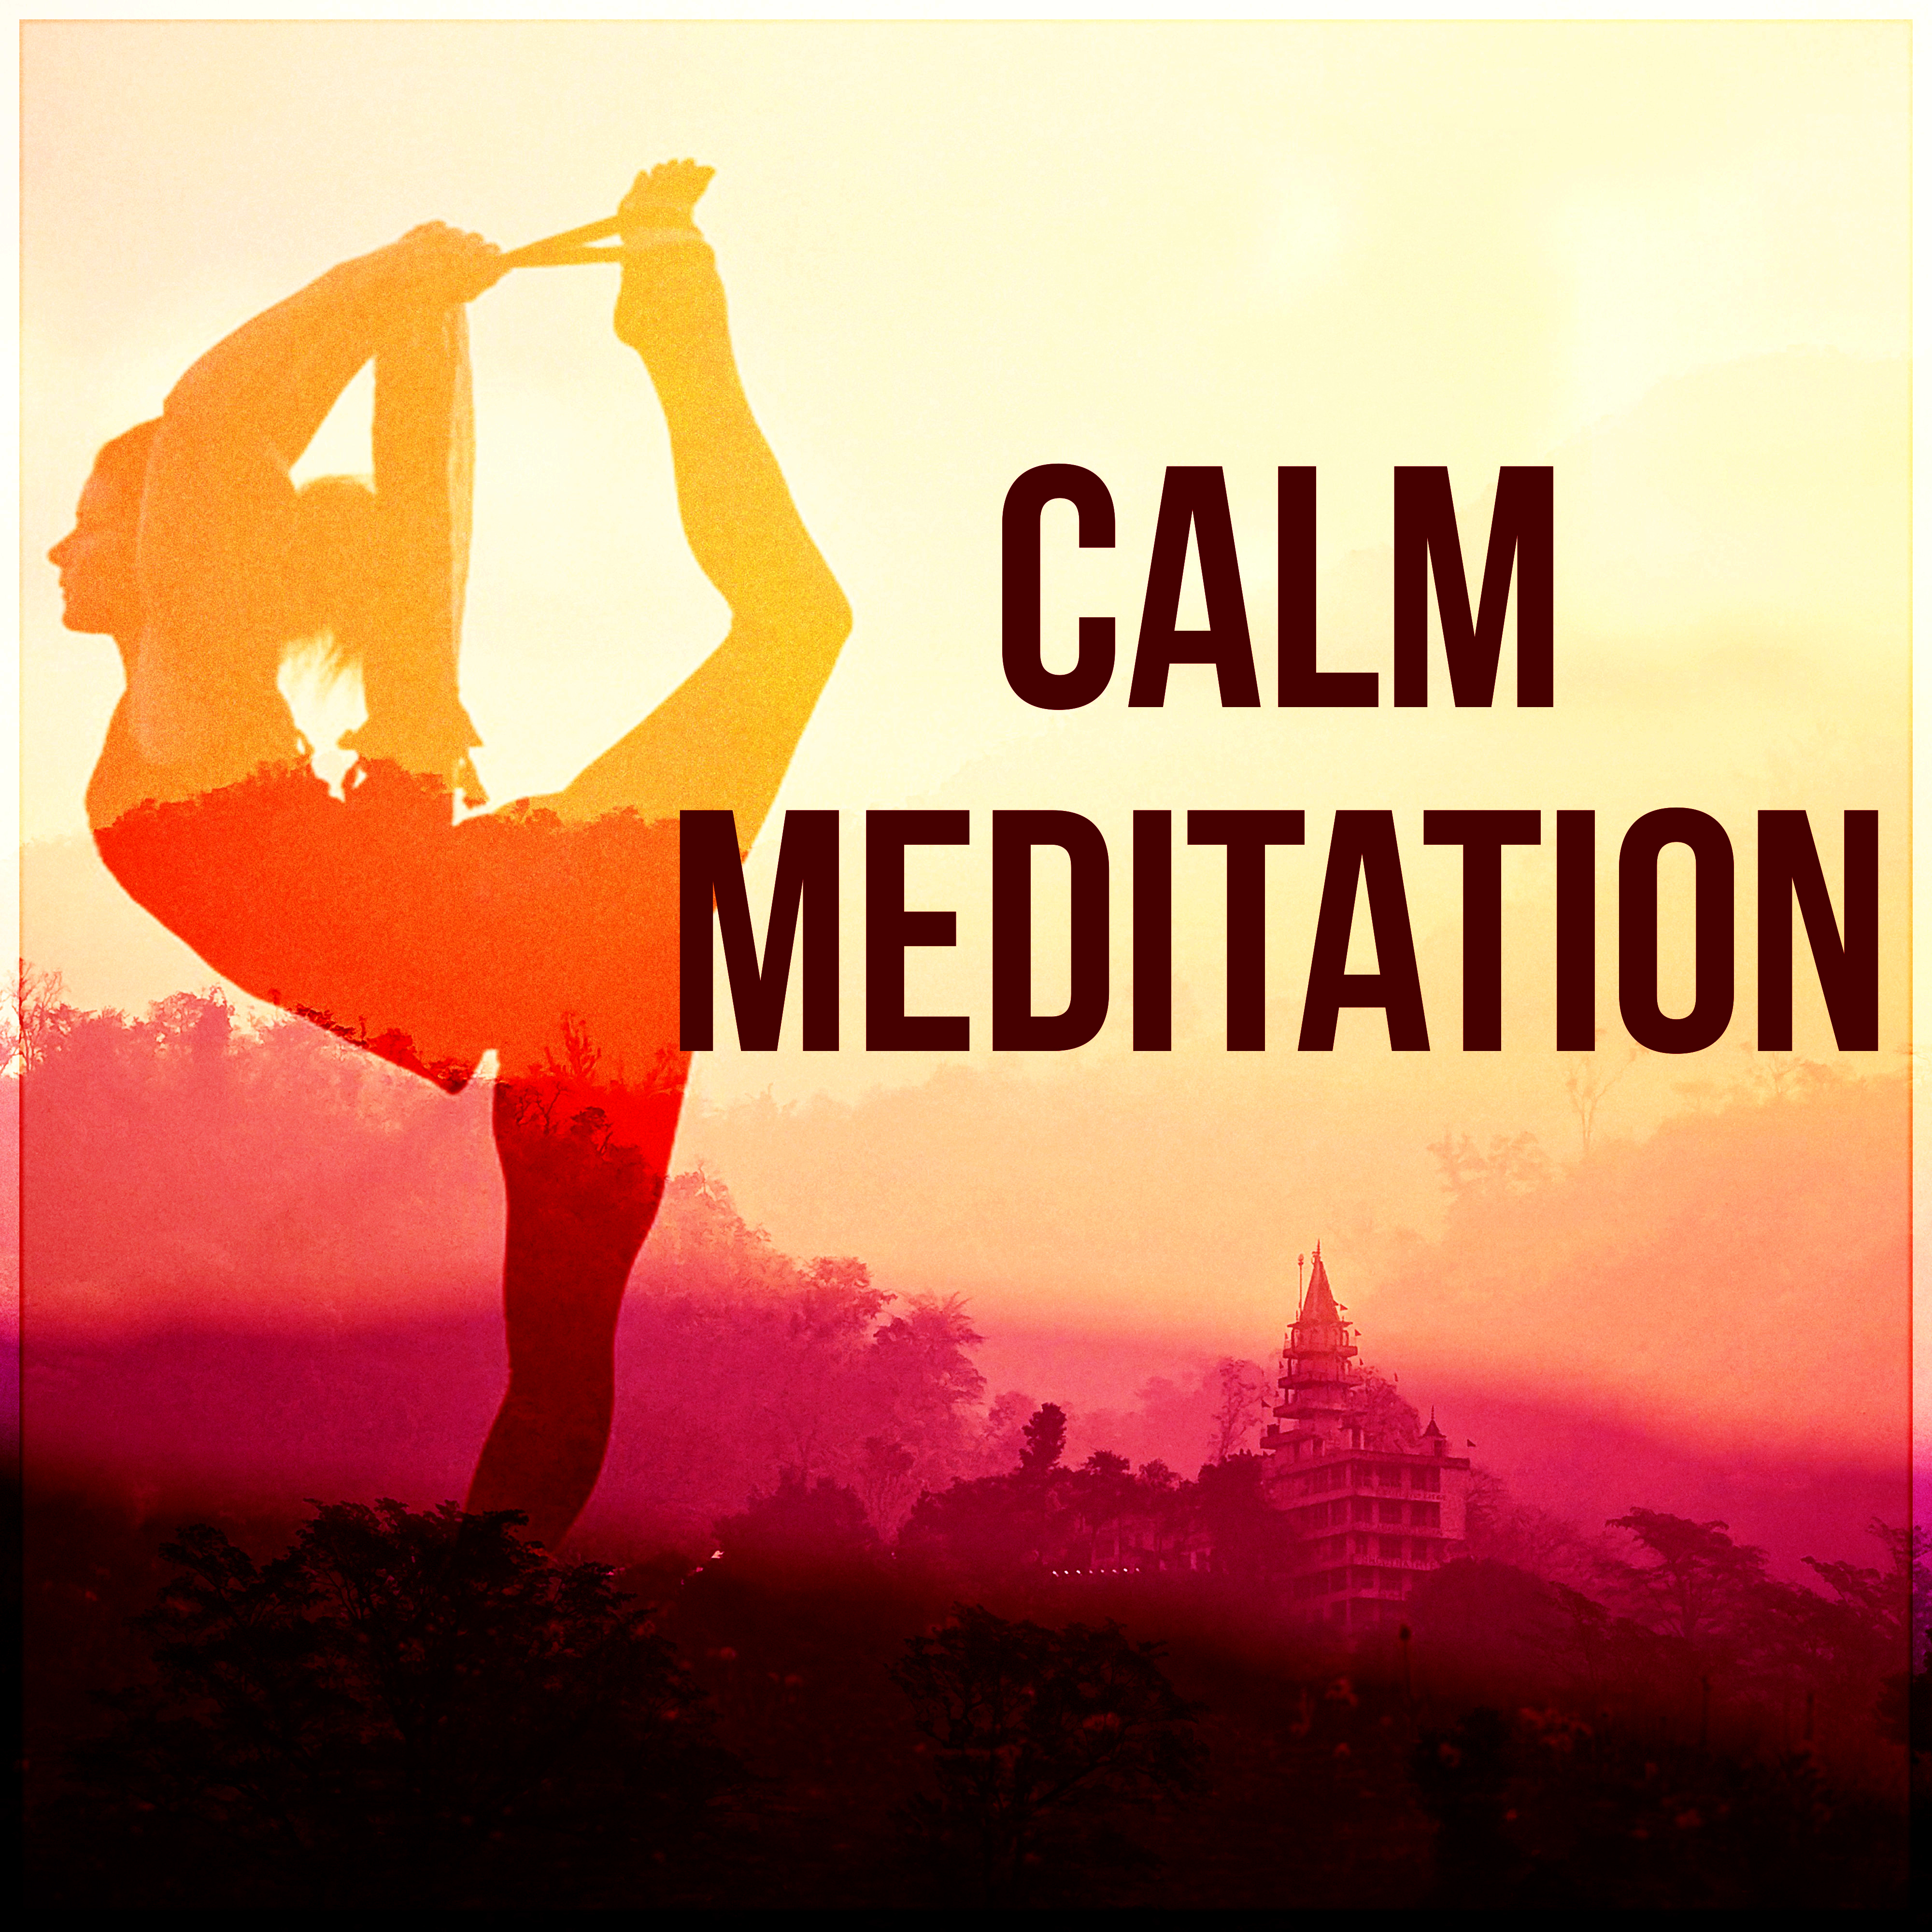 Calm Meditation – Natural White Noise, Sounds of Nature, Relaxing Songs for Mindfulness Meditation & Yoga Exercises, Guided Imagery Music, Asian Zen Spa and Massage